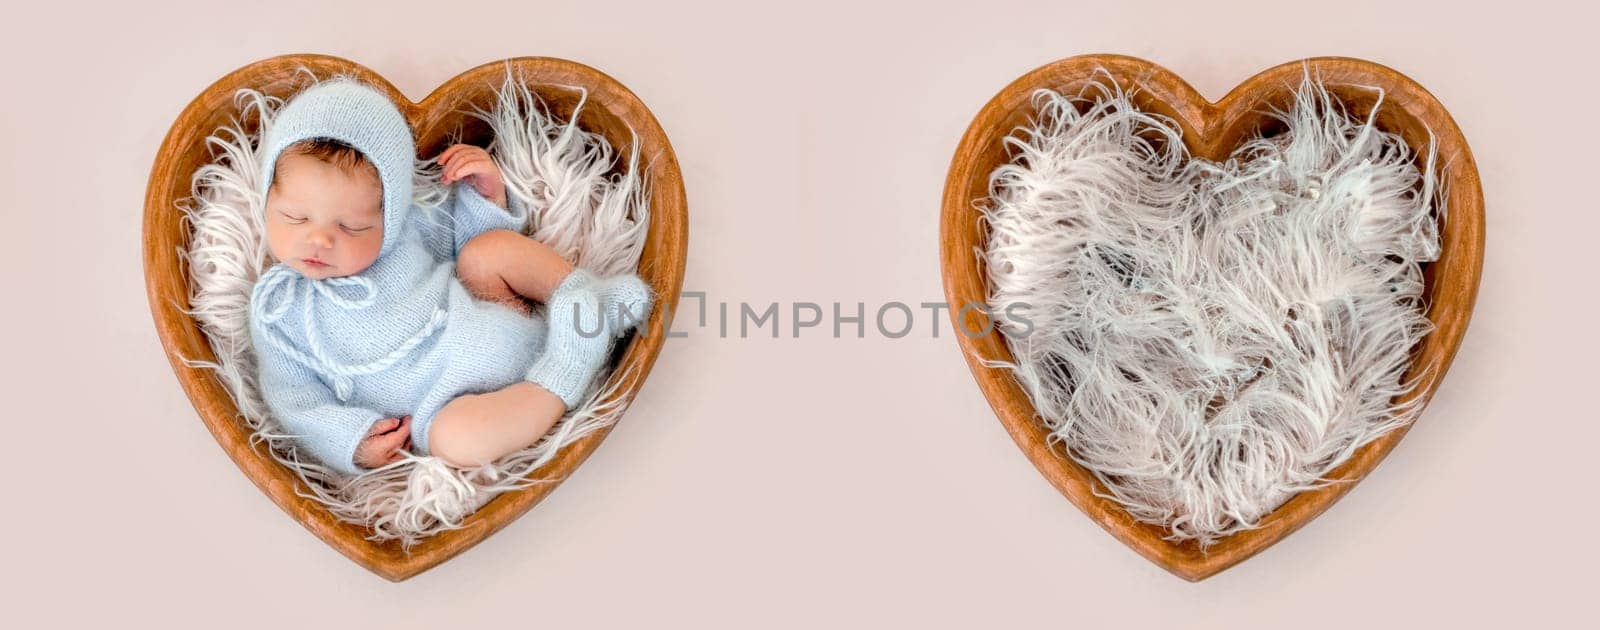 Newborn baby boy sleeping wearing knitted costume and hat in tiny heart shape bed. Infant kid studio portrait with fur. Collage mix with infant and studio furniture for kid photoshoot